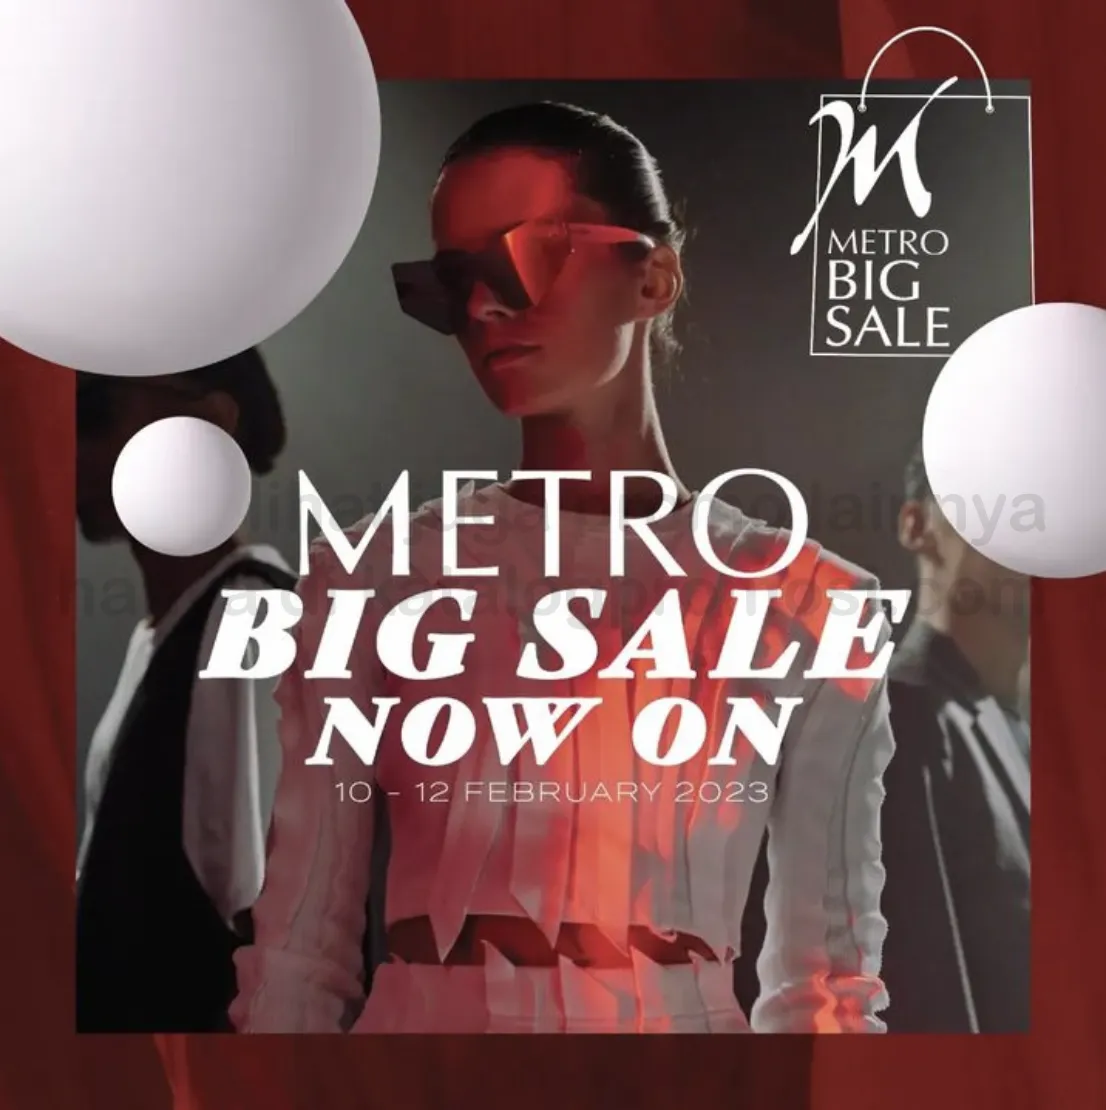 Promo METRO BIG SALE NOW ON!  ENJOY EARLY BIRD SPECIAL OFFERS, 3 DAYS ONLY!